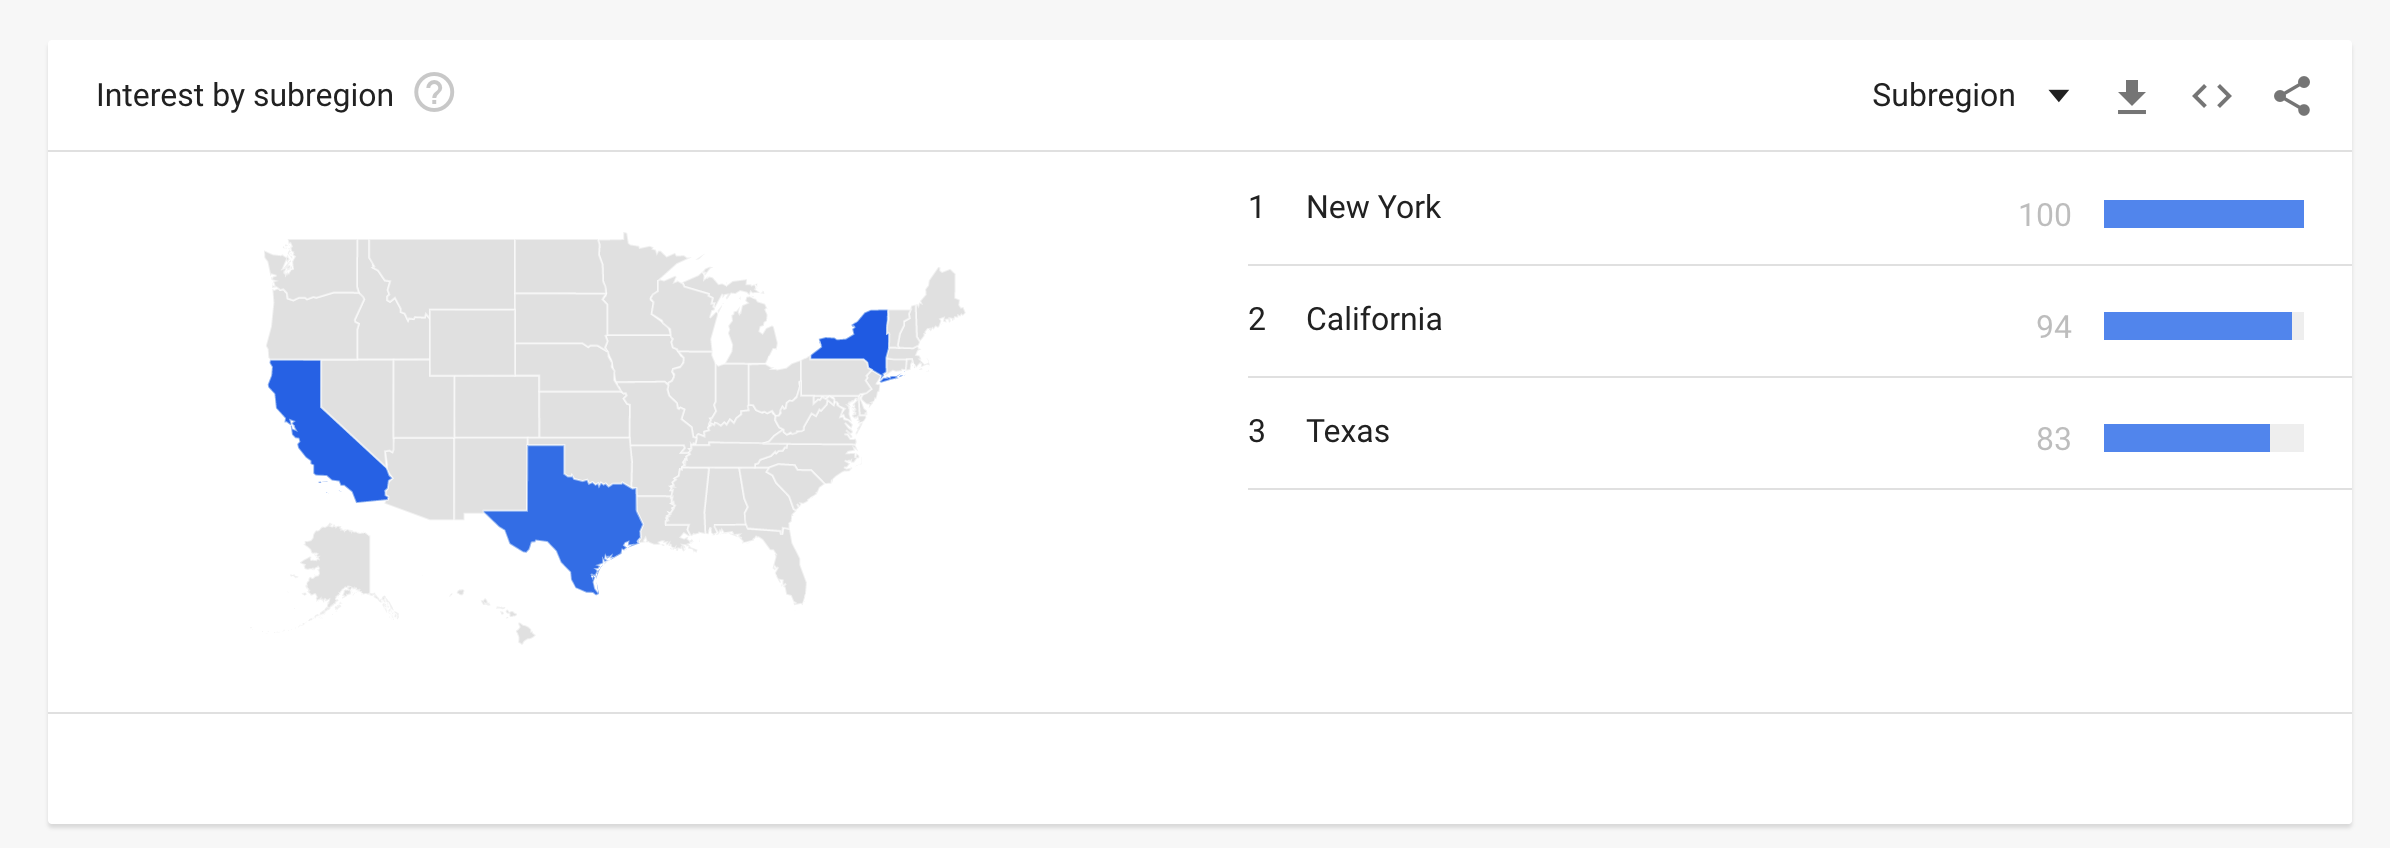 Google Trends Interest by Subregion